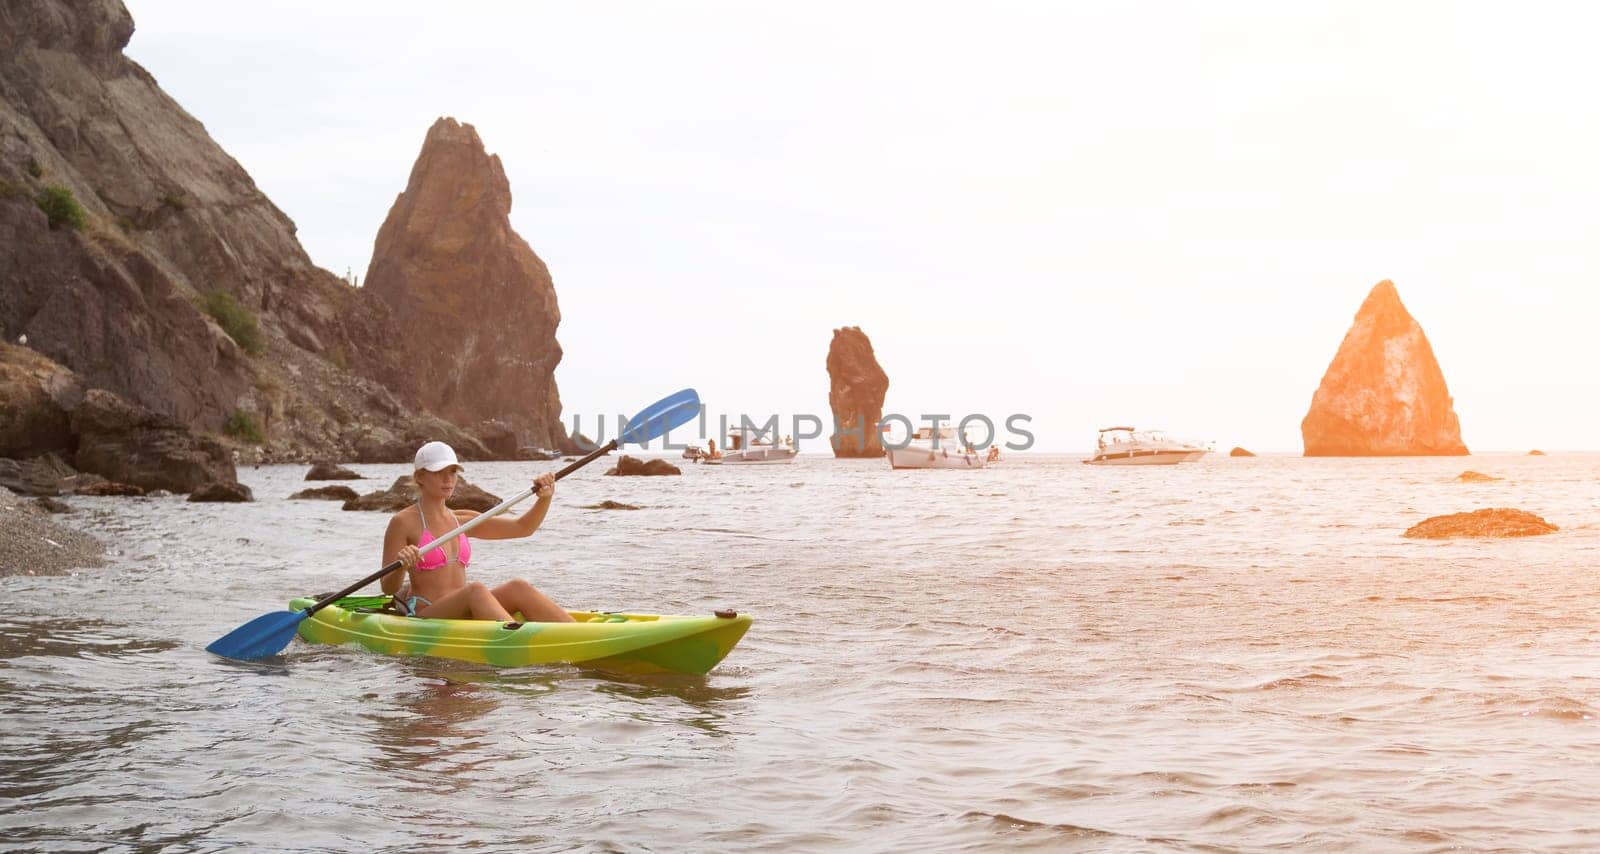 Kayaking. Travel adventure kayak on the tropical sea on a sunny day. Woman rowing a canoe.